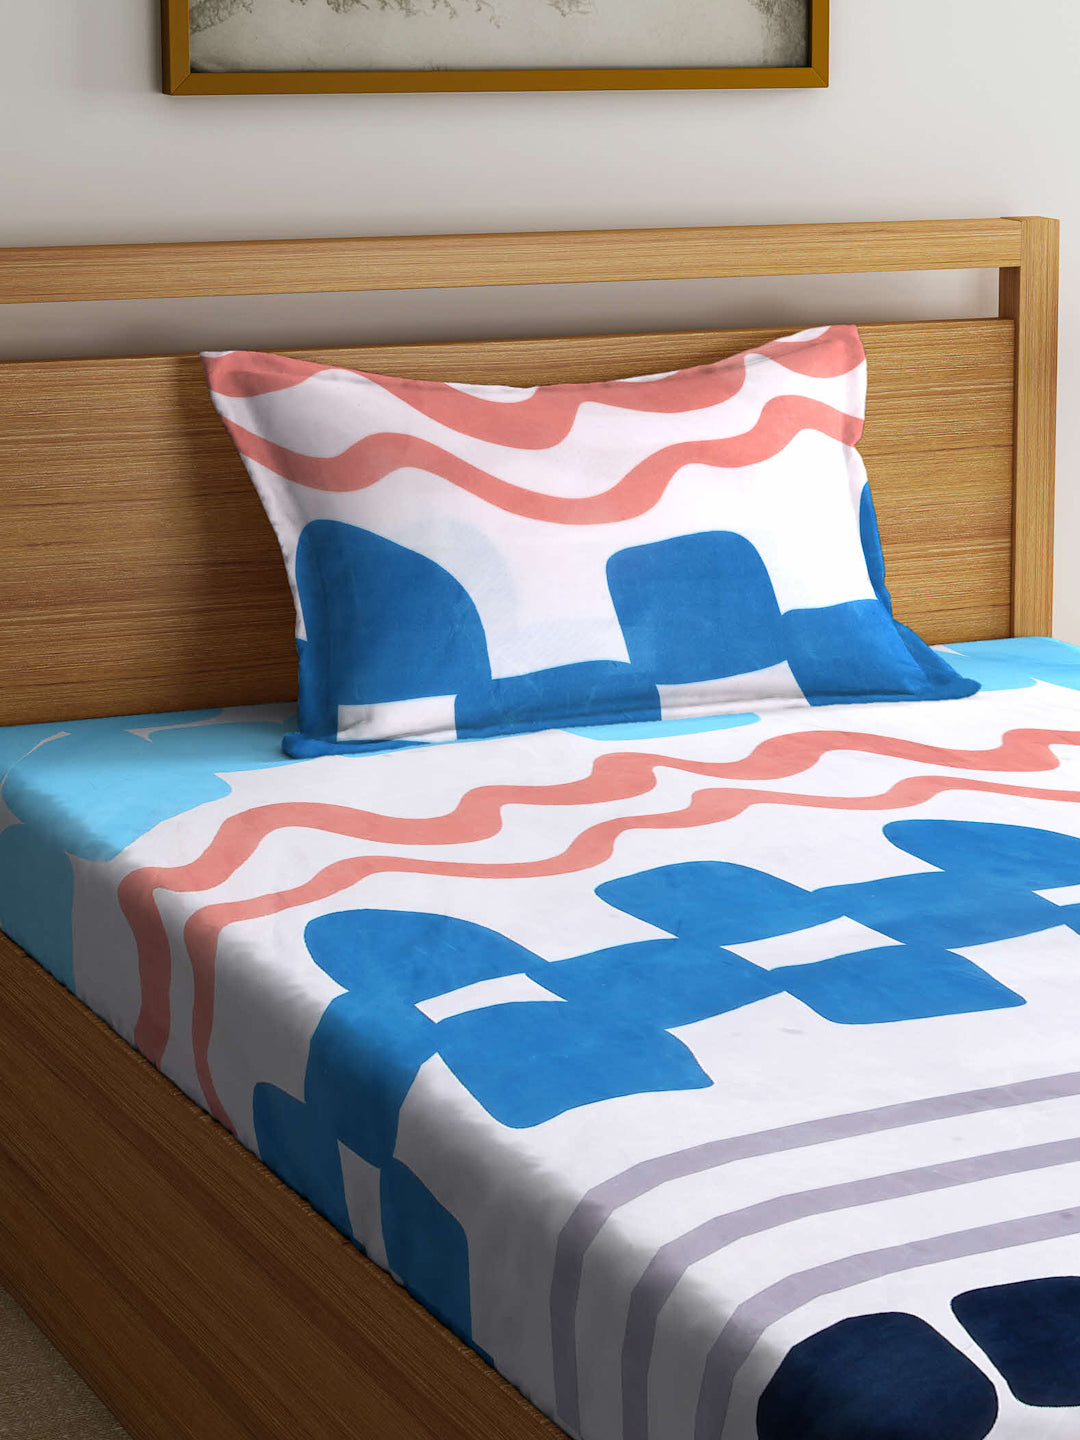 Arrabi Multi Abstract TC Cotton Blend Single Size Fitted Bedsheet with 1 Pillow Cover (220 X 150 cm)